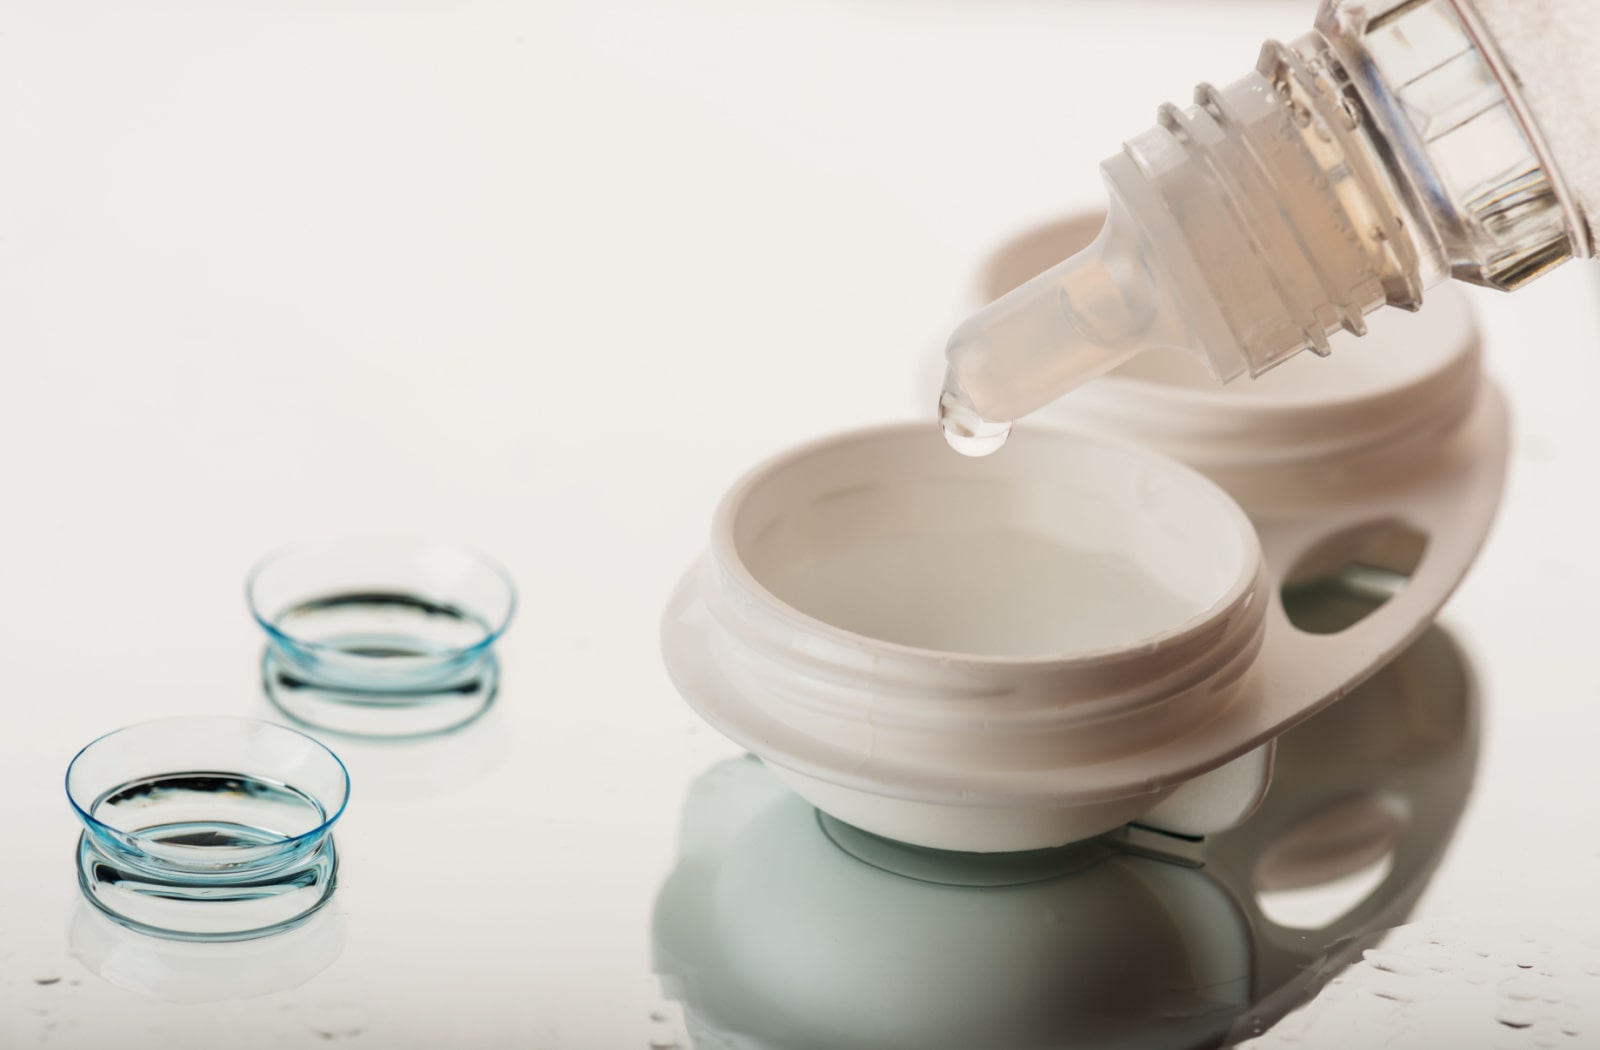 A pair of contact lenses sitting next to a contact lens case and someone pouring contact lens solution into the case